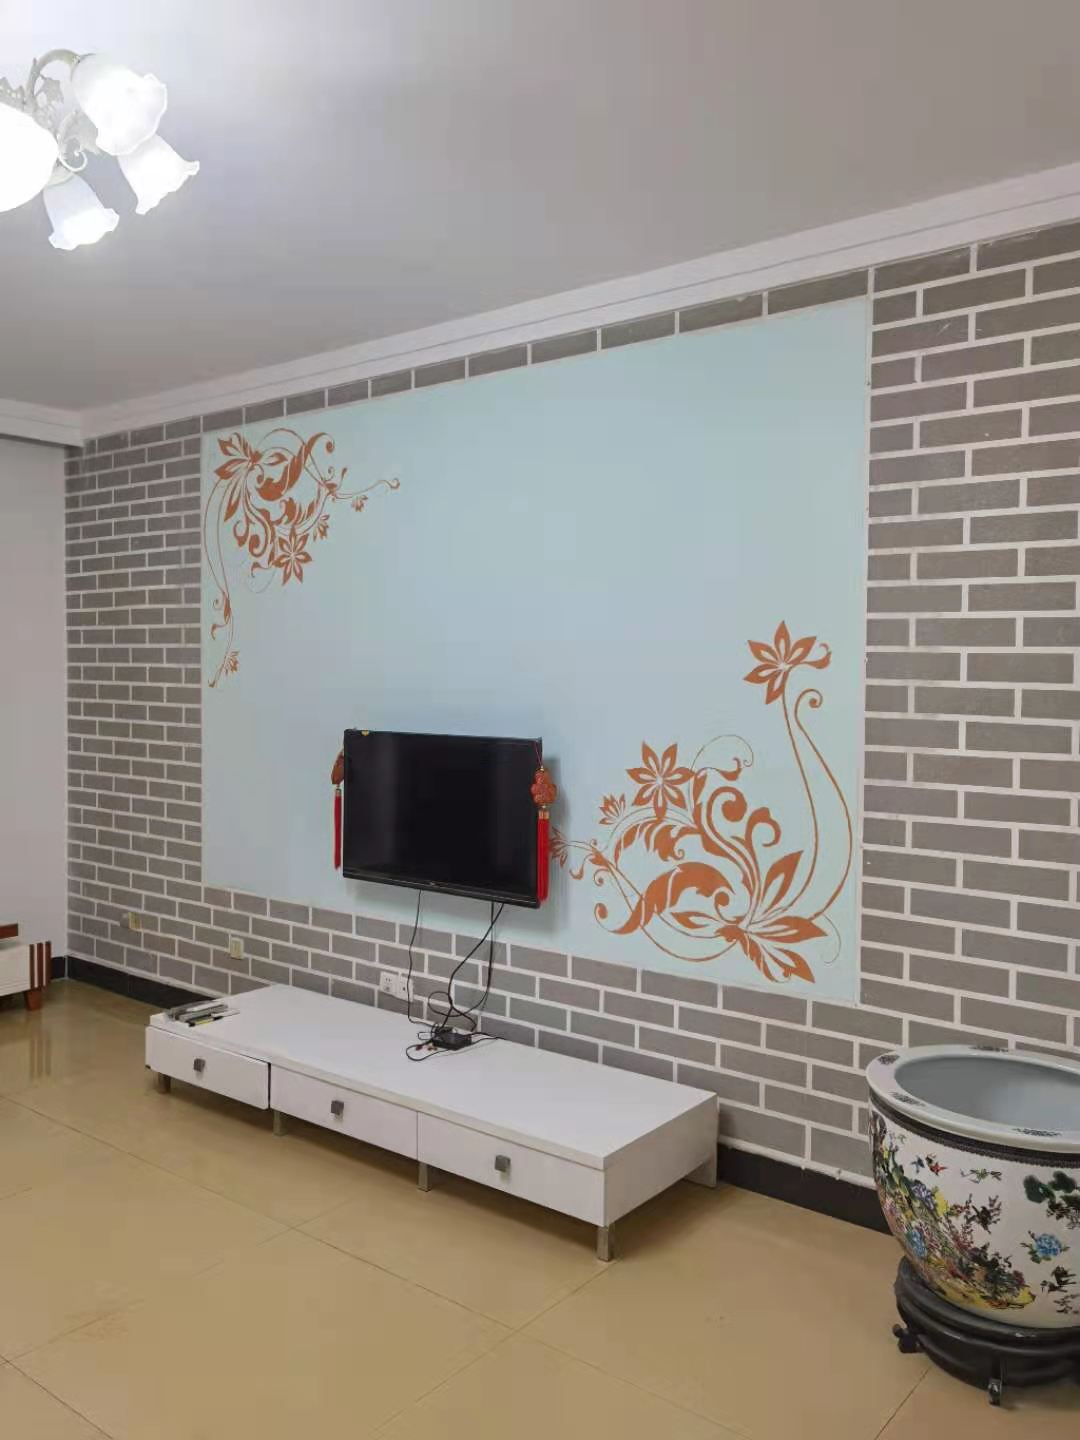  Guoqing South Road people's hospital family room room 3 hardbound rental